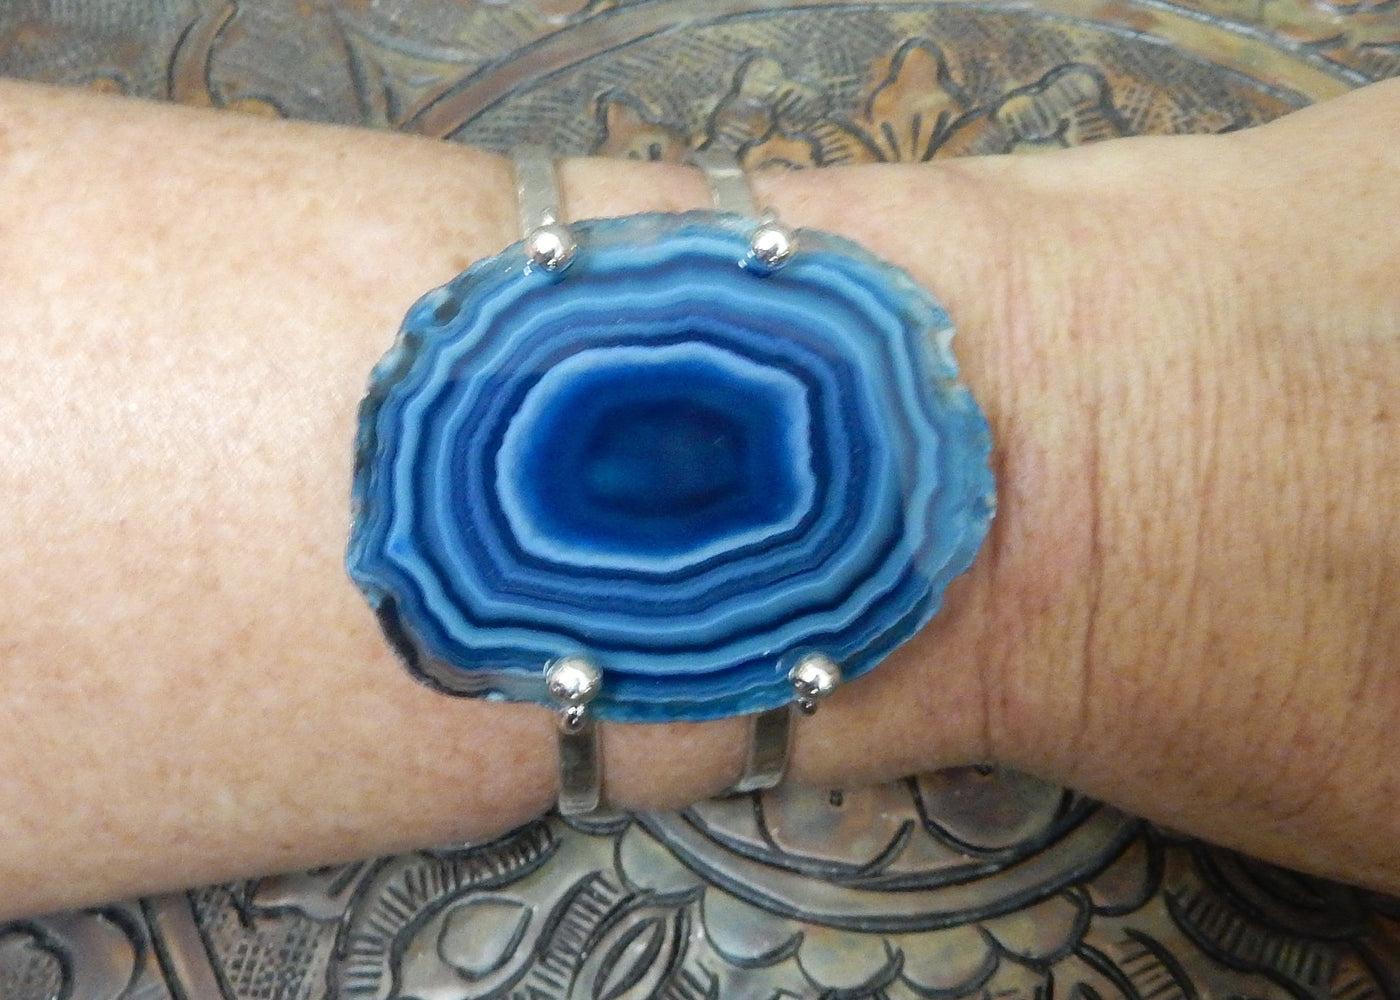 Blue Agate Slice with Adjustable Bracelet in silver on a wrist.